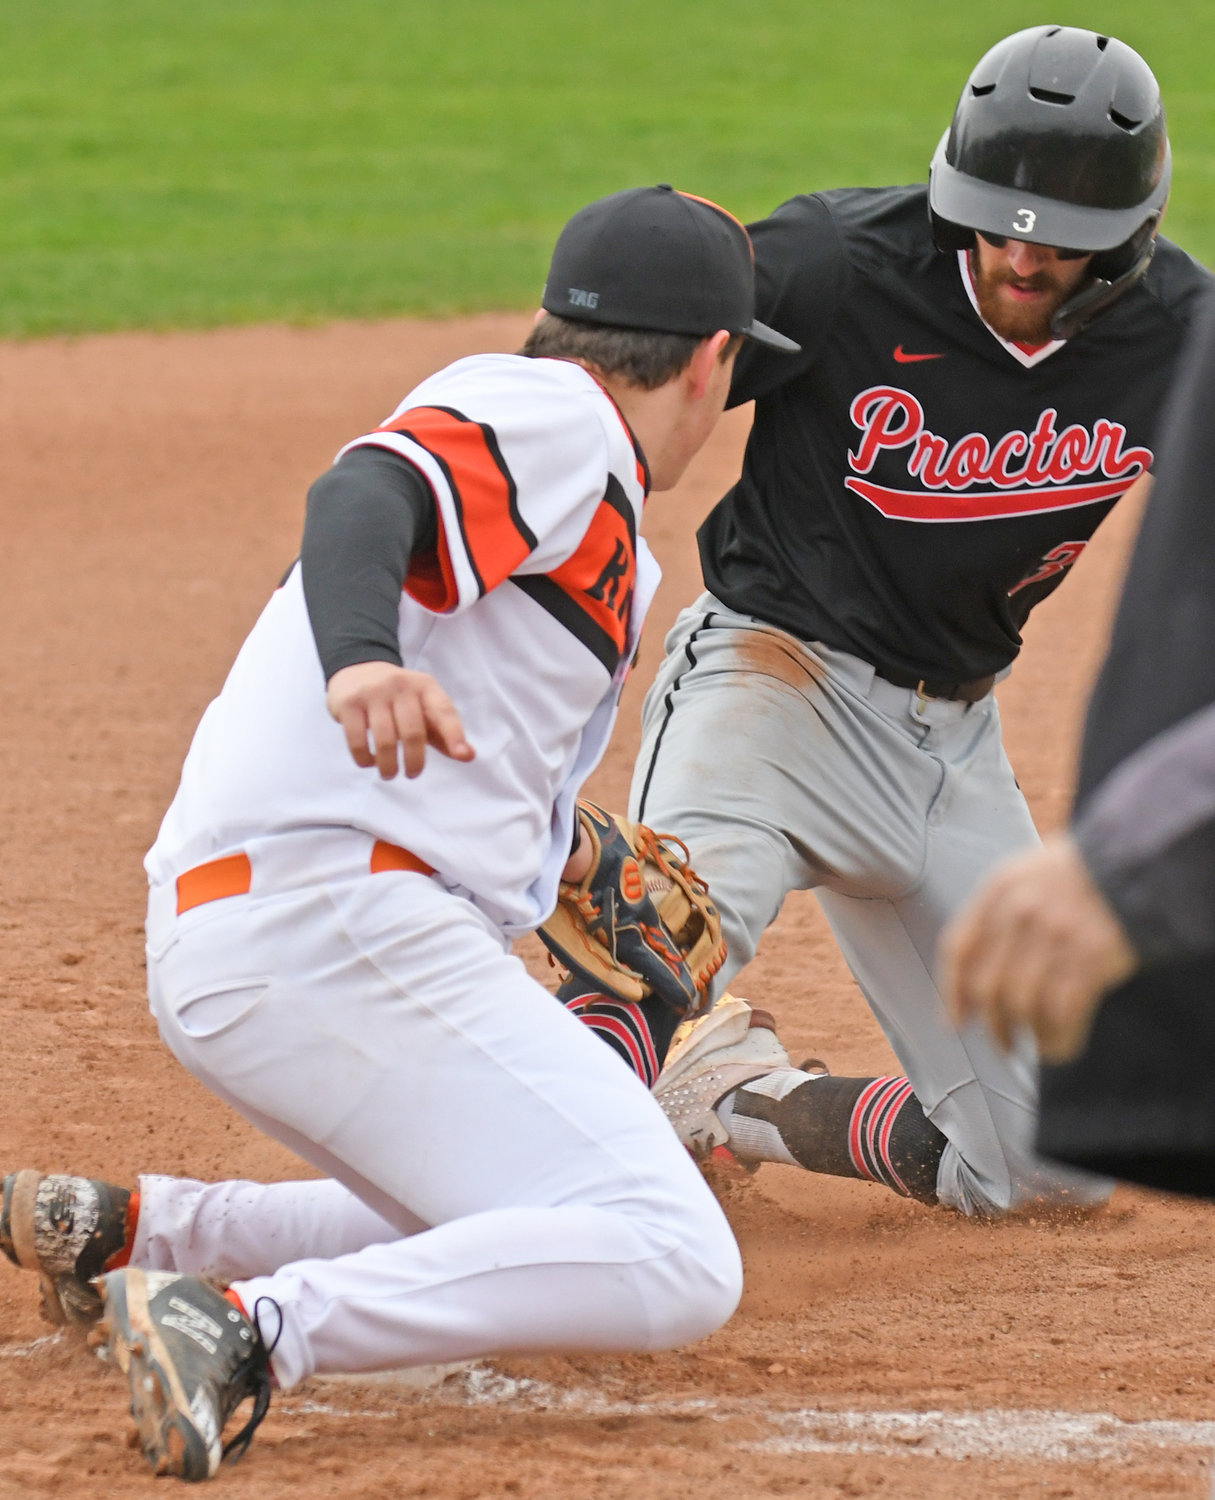 SAFE AT THIRD — Proctor’s Todd Abraham is safe at third base with RFA’s Michael Flint trying to put the tag on during a game Tuesday in Rome. Abraham had three RBIs as Proctor won 11-4 in six innings. The game was called due to darkness.